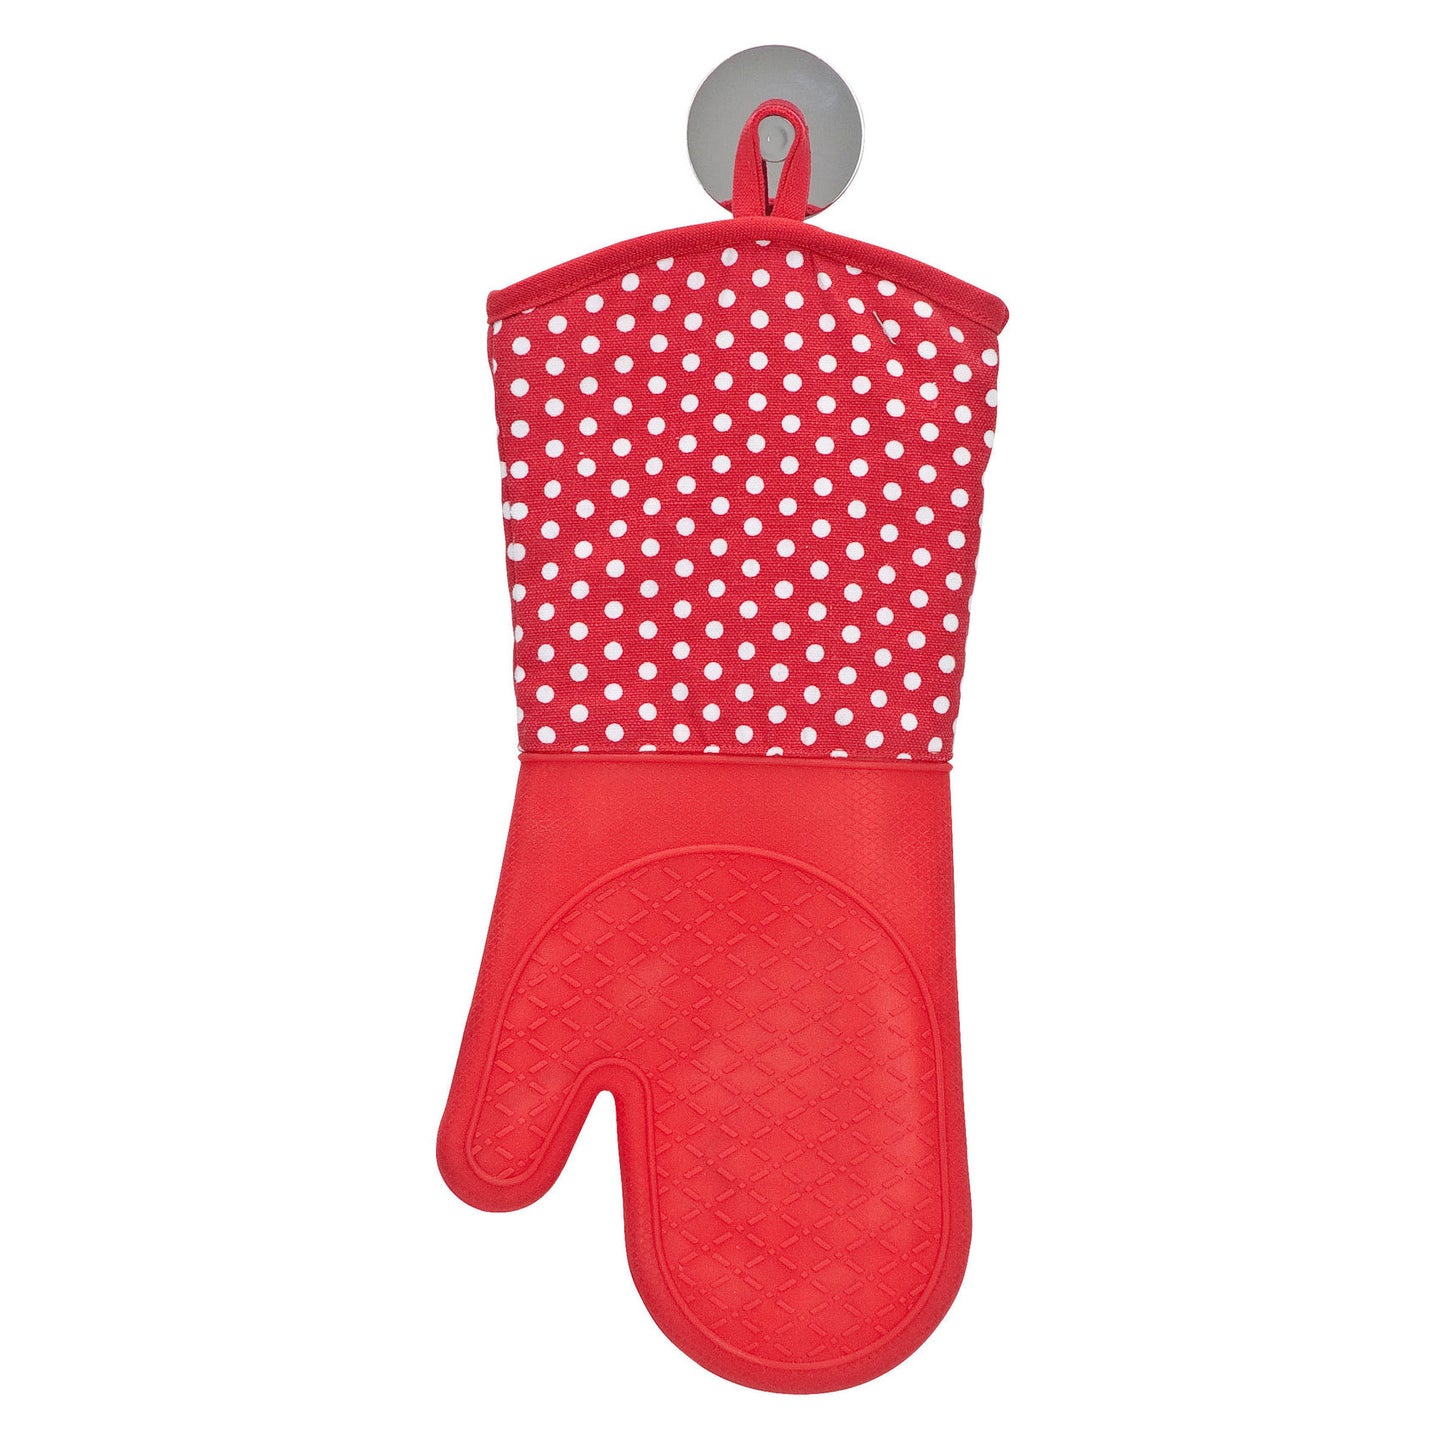 Oven Gloves Silicone 2 Pcs - Red W/ White Dots